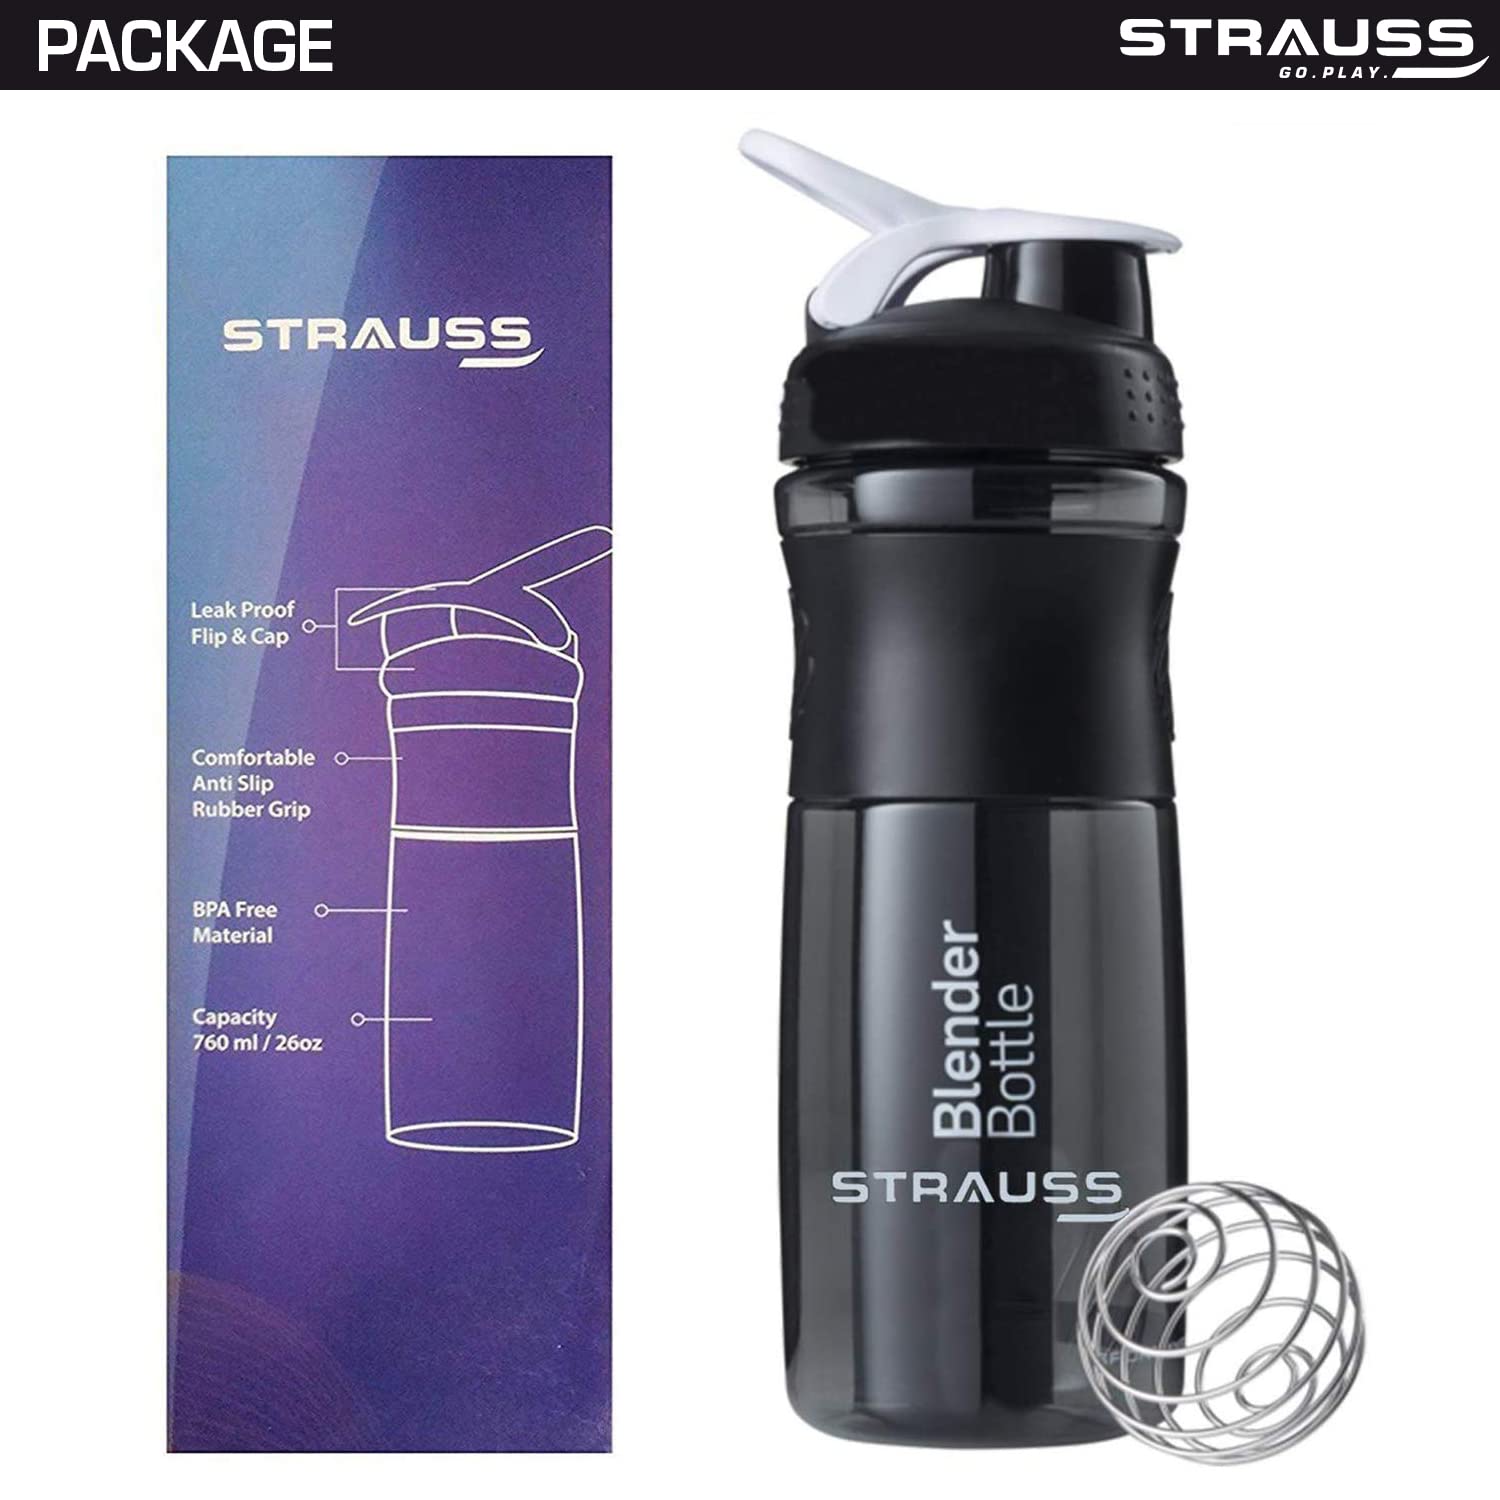 Strauss Blender Shaker Sipper Bottle 760ml | Ideal for Protein, Pre Workout And BCAAs & Water | High-quality BPA Free Material with 100% Leakproof Guarantee | Rounded corners for easy cleaning (Black)